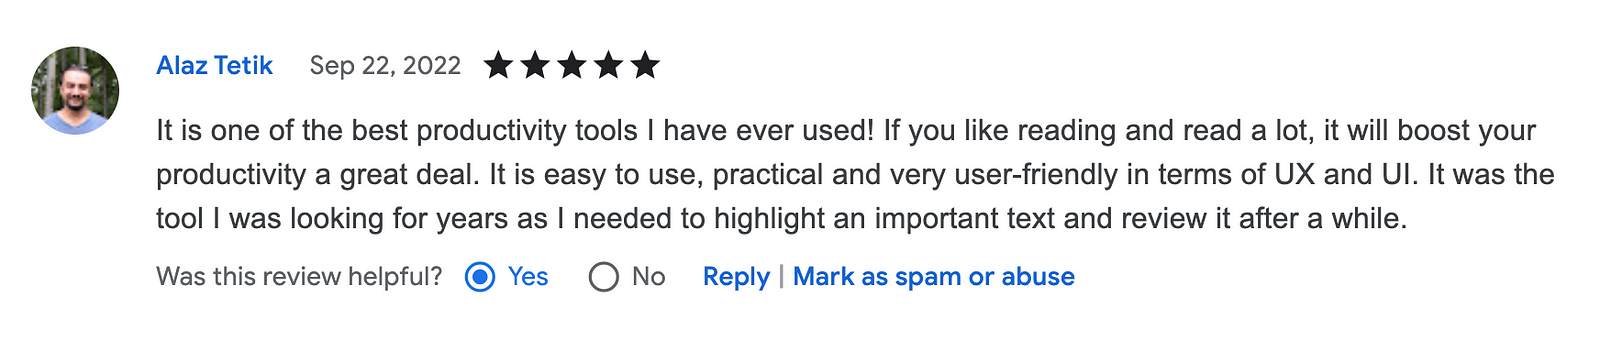 User review: “It is one of the best productivity tools I have ever used! If you like reading and read a lot, it will boost your productivity a great deal. It is easy to use, practical and very user-friendly in terms of UX and UI. It was the tool I was looking for years as I needed to highlight an important text and review it after a while.”